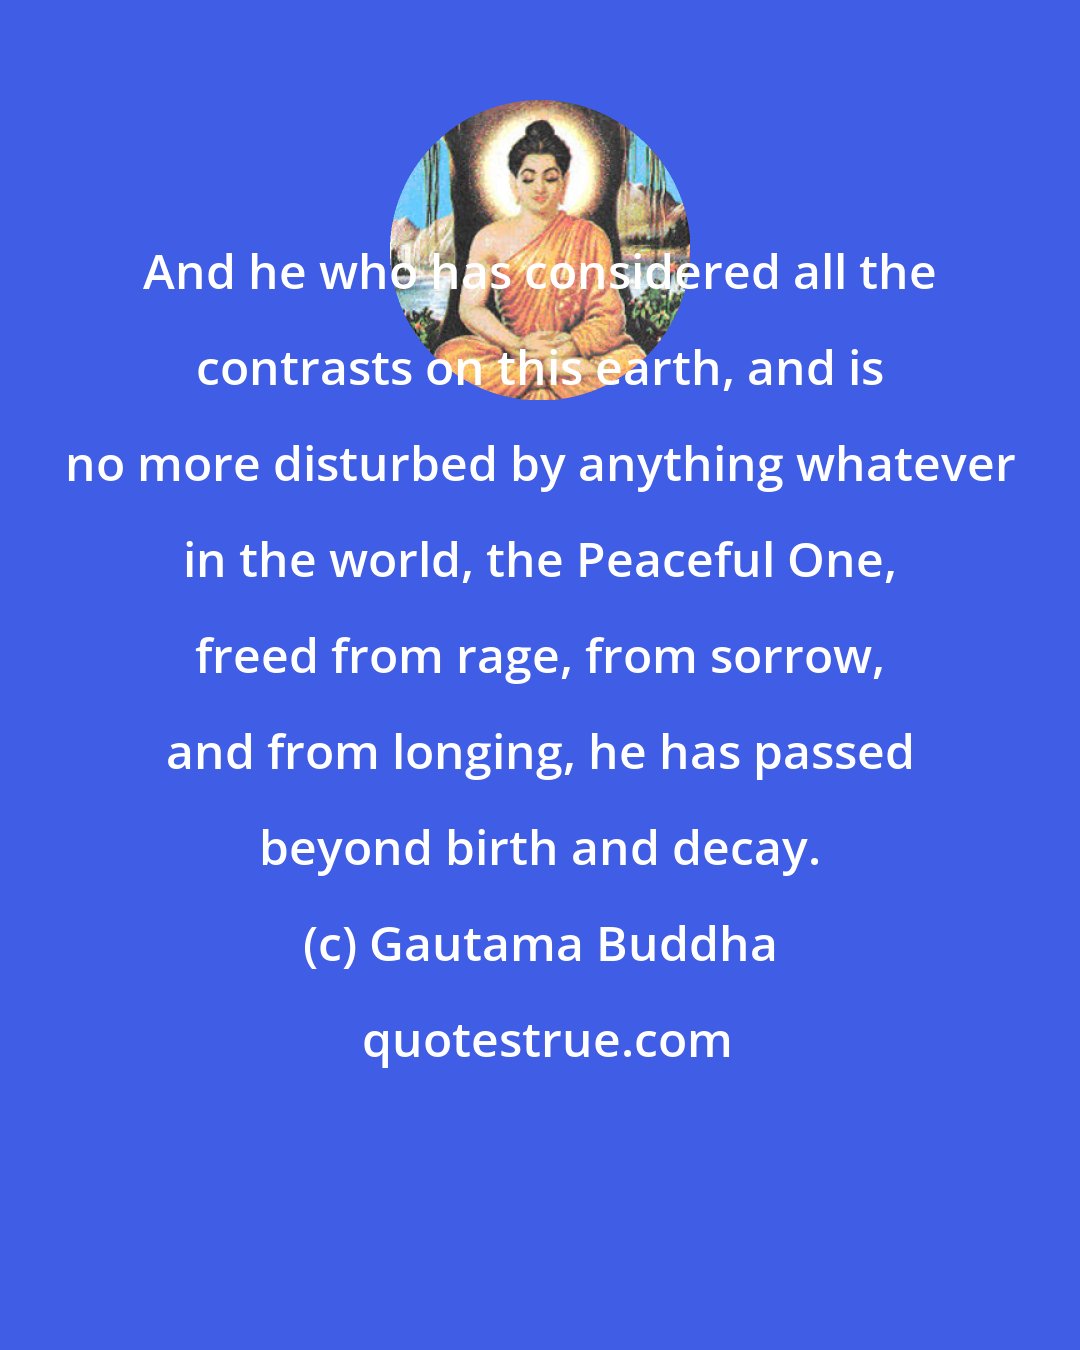 Gautama Buddha: And he who has considered all the contrasts on this earth, and is no more disturbed by anything whatever in the world, the Peaceful One, freed from rage, from sorrow, and from longing, he has passed beyond birth and decay.